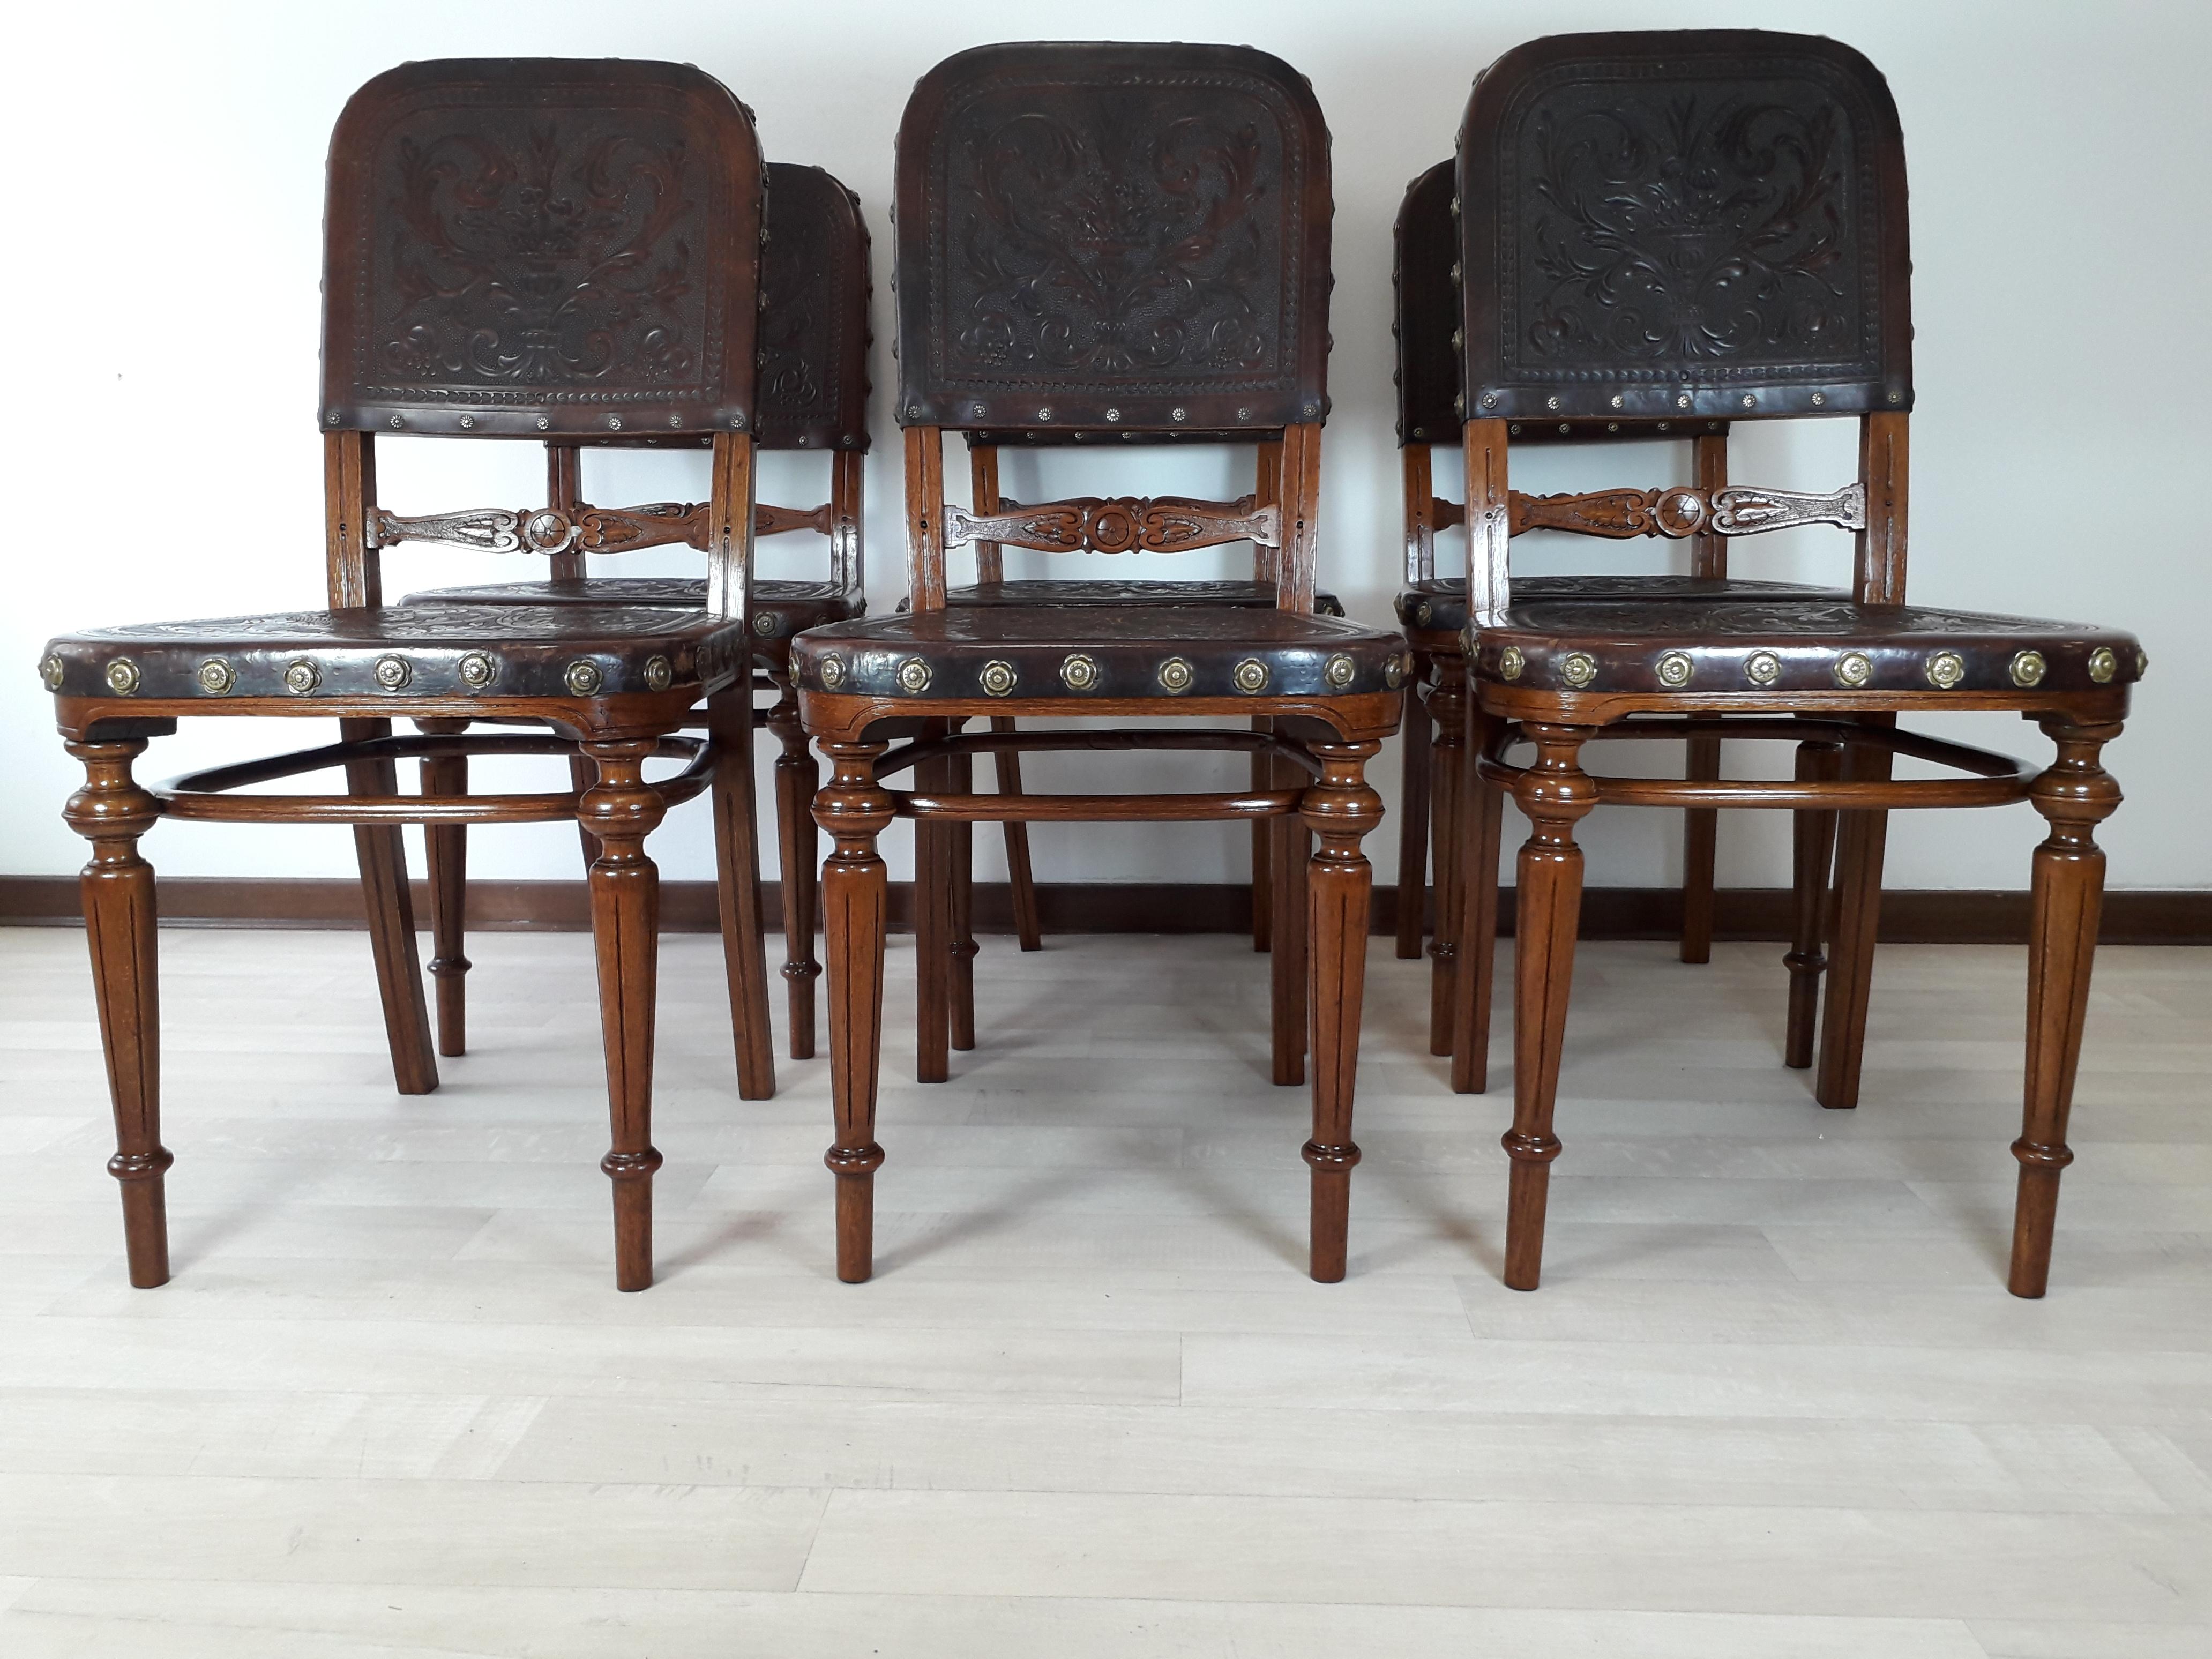 Extremely rare Thonet set from the end of the 19th century, entirely original in all its parts.
(there isn't a screw that doesn't belong to him).
Chairs made not in series but on commission for the high nobility of Vienna, the so-called 